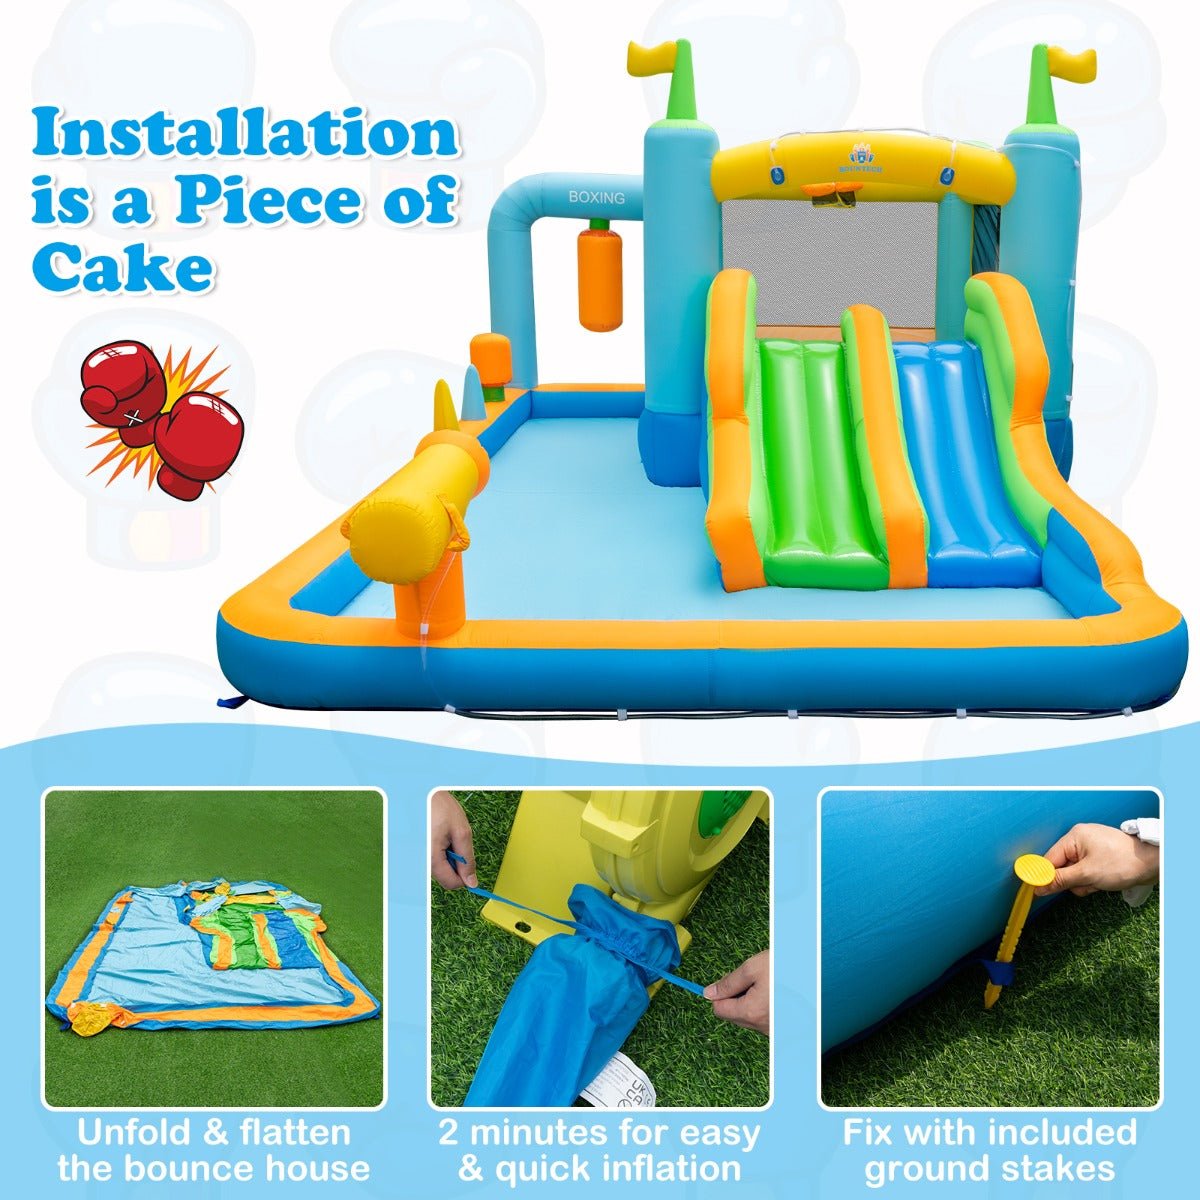 Inflatable Bounce House Overview